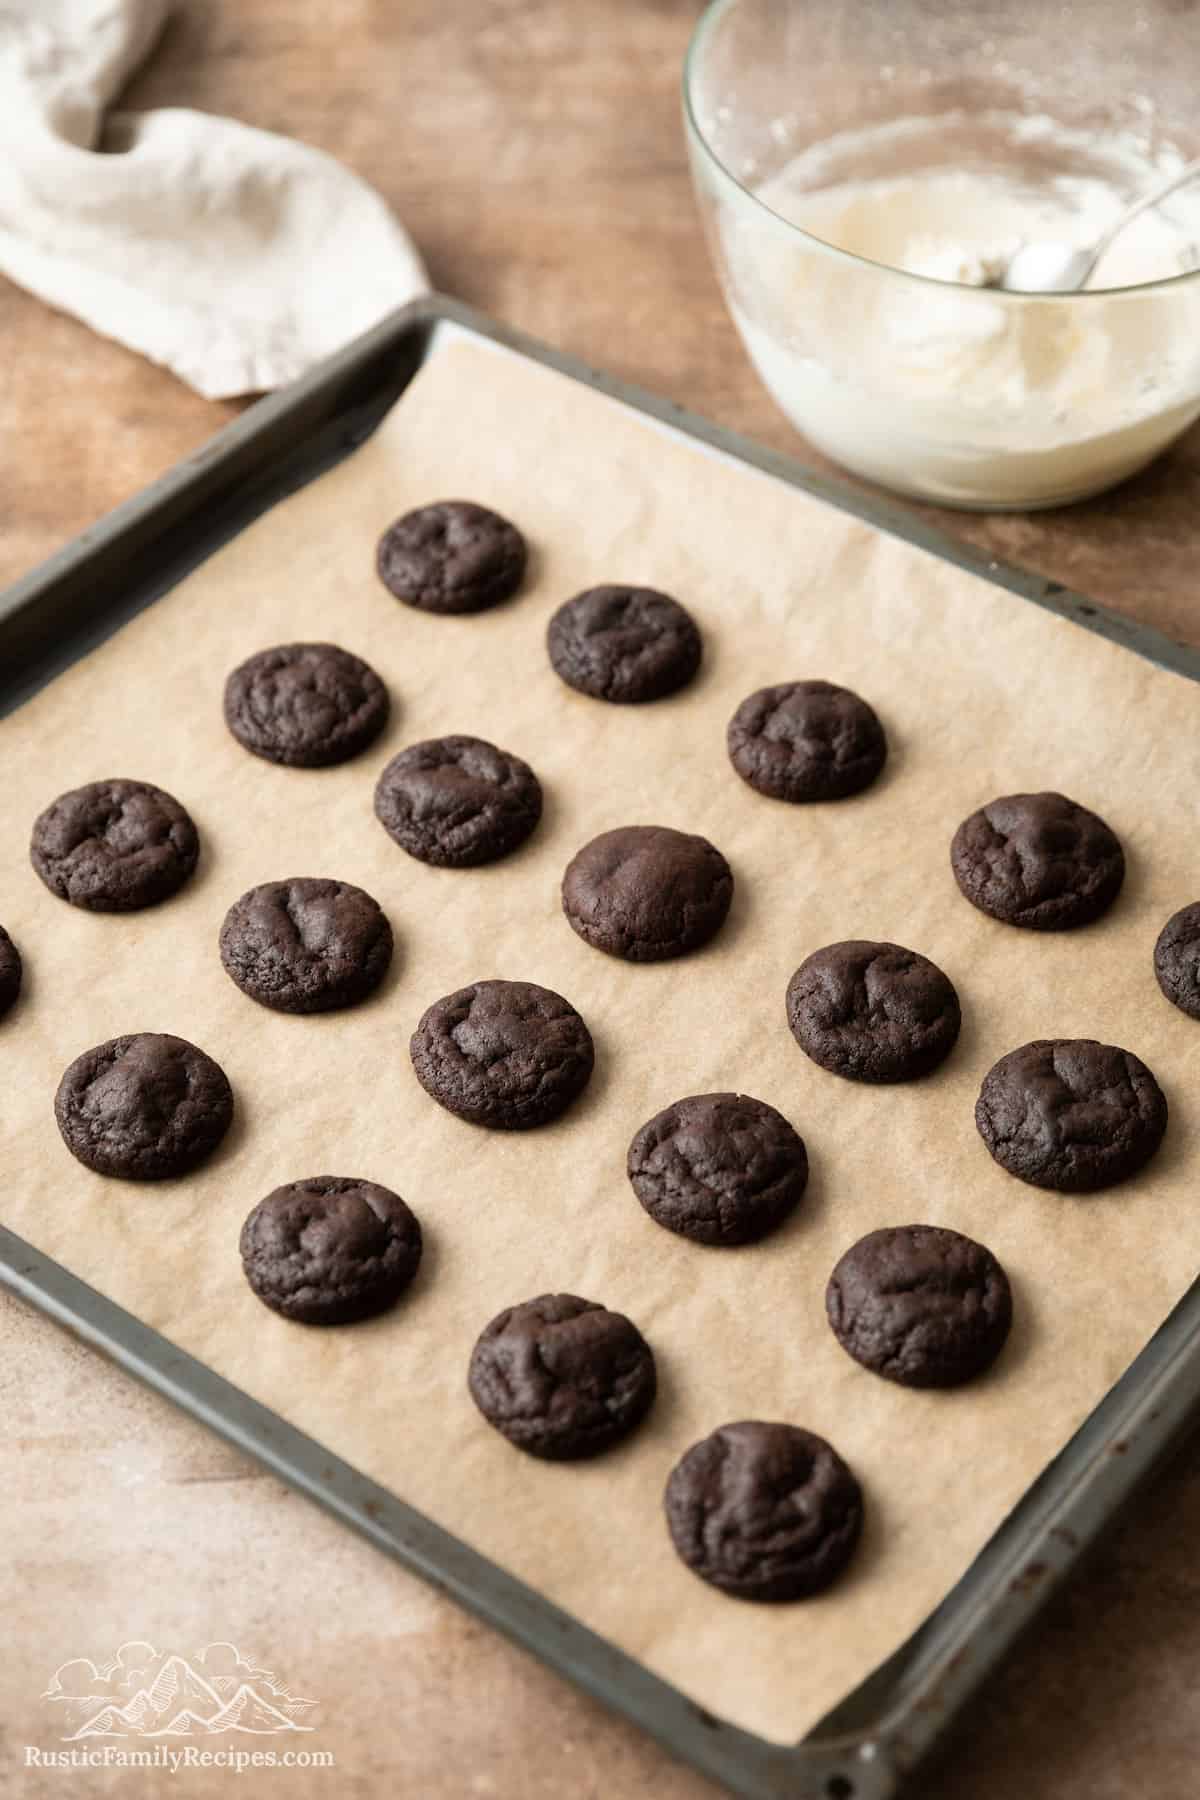 Baked chocolate cookies in rows on a parchment-lined baking sheet.